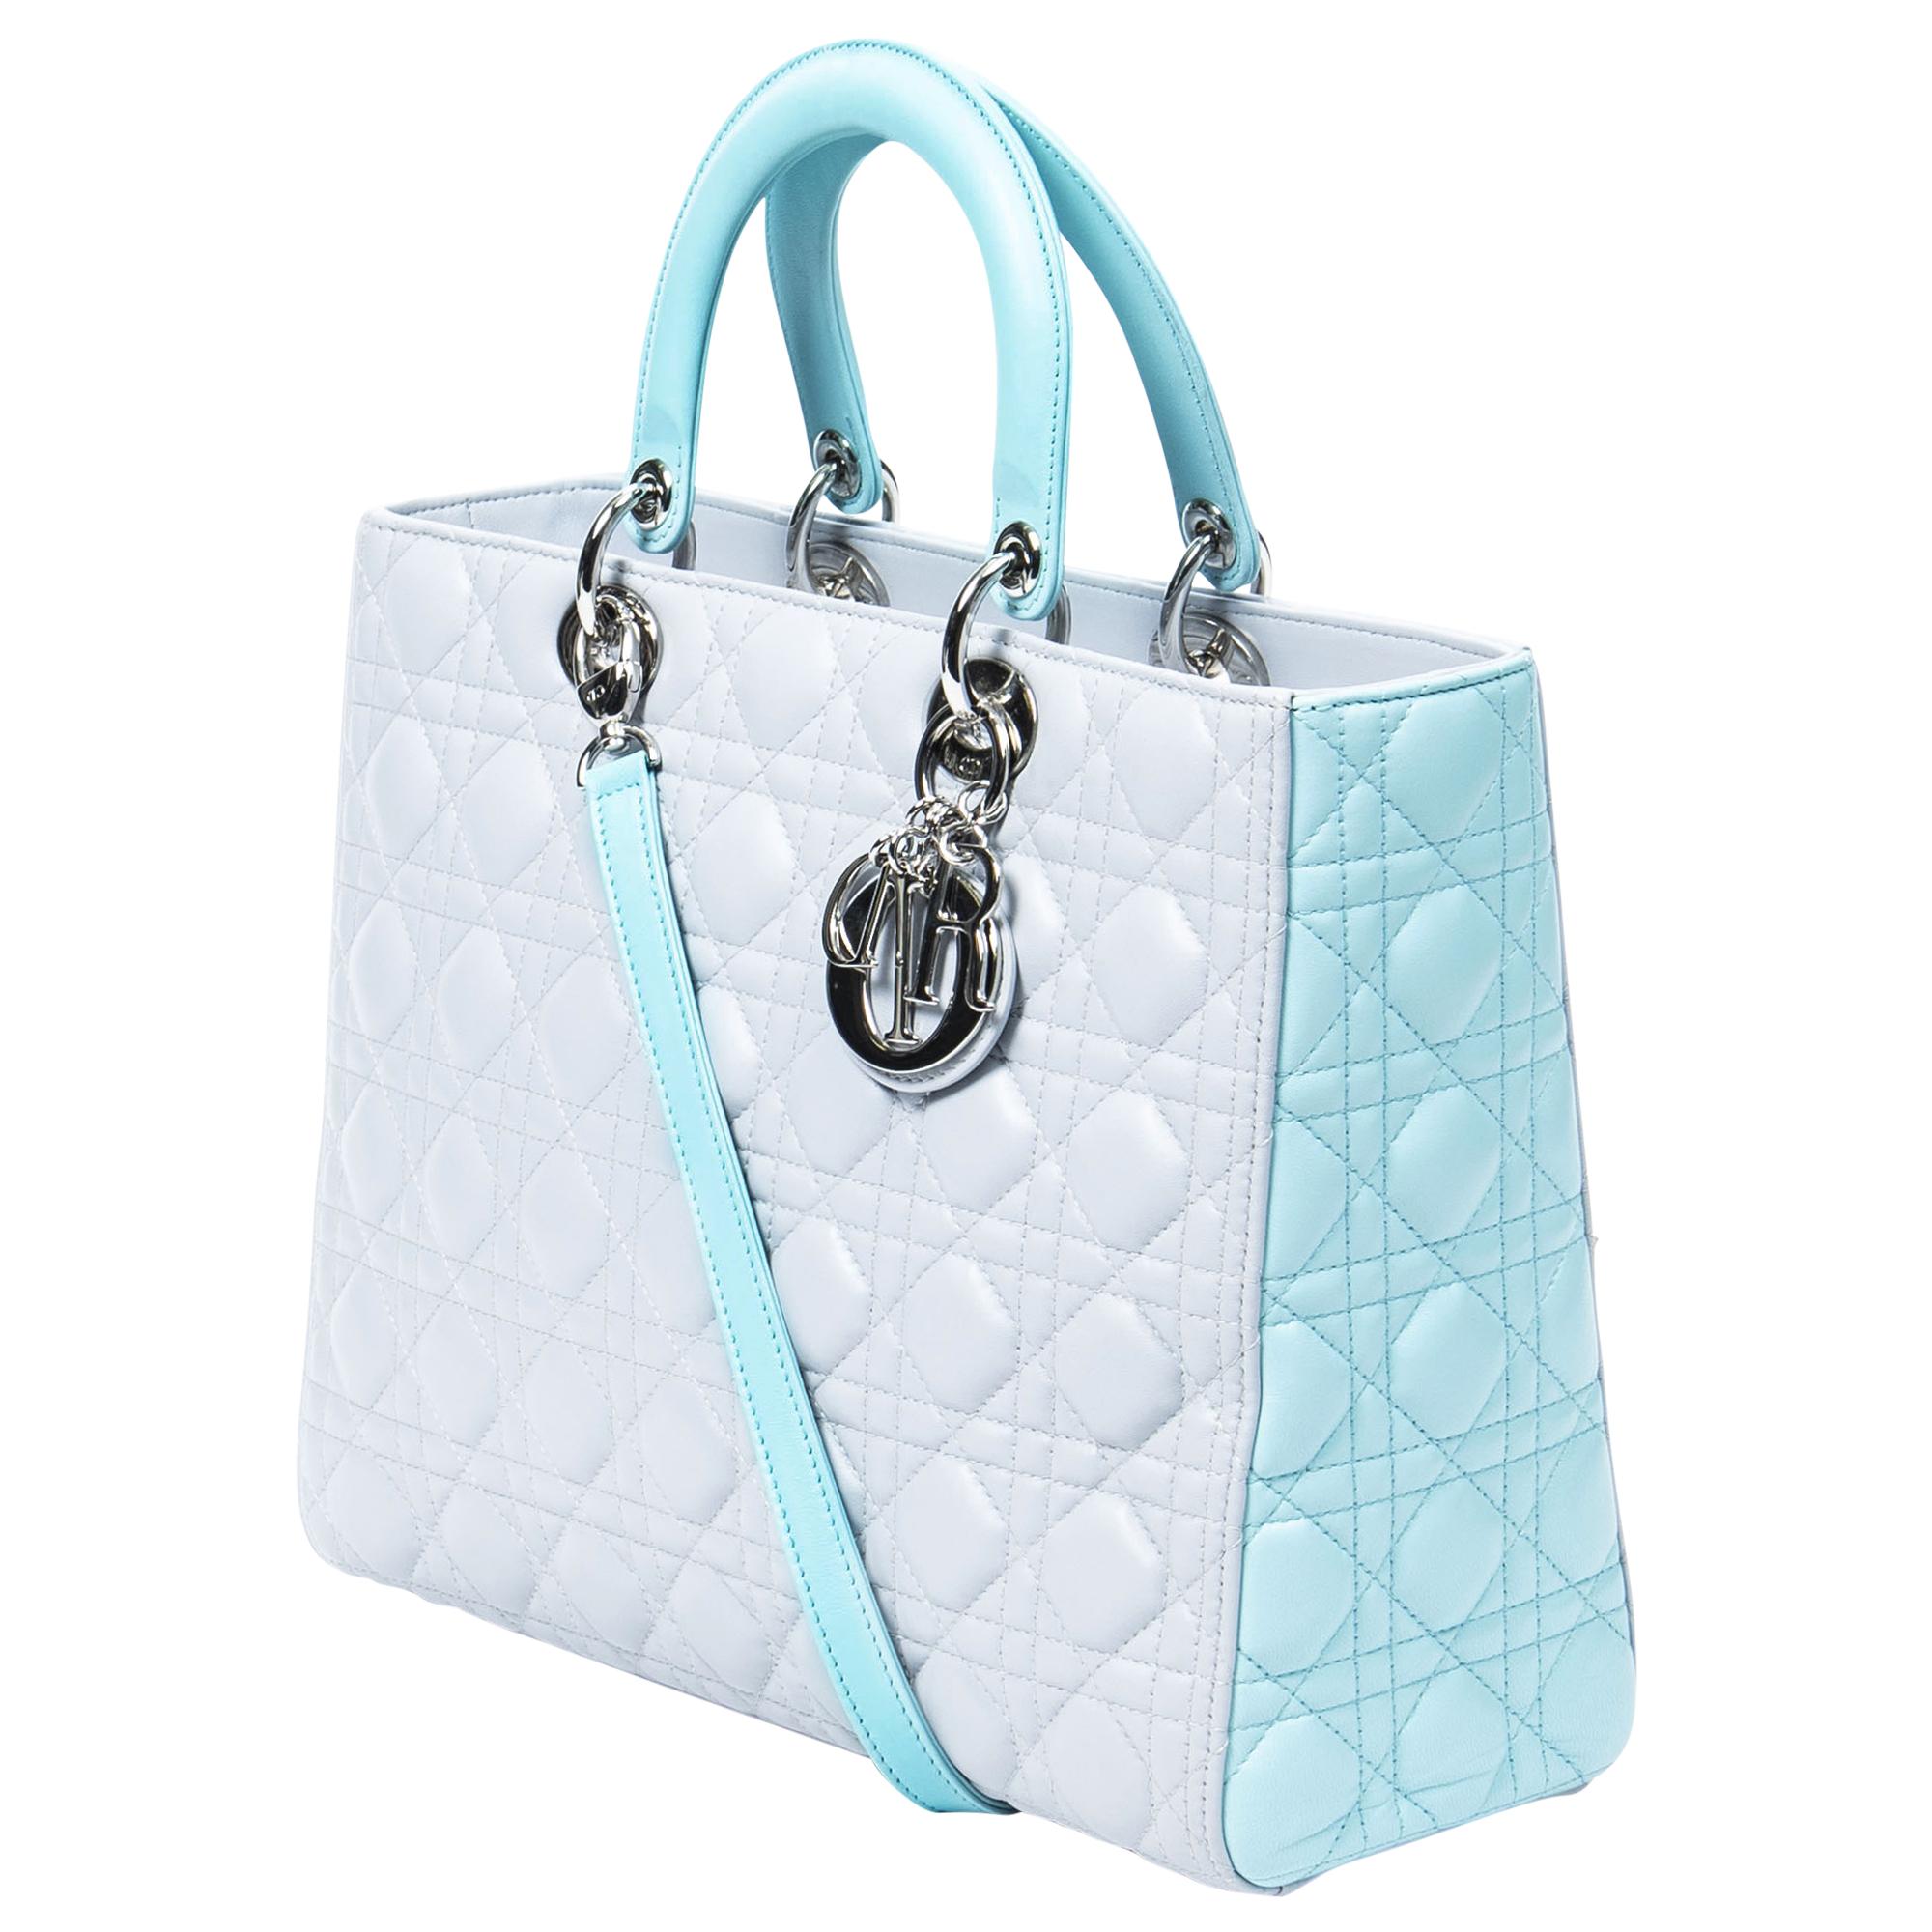 Meet the Dior Light Gray/Light Turquoise Large Bicolor Lady Dior, a chic statement piece for the sophisticated fashionista. Crafted from luxurious cannage lambskin leather, its light gray and light turquoise bicolor design radiates elegance. Adorned